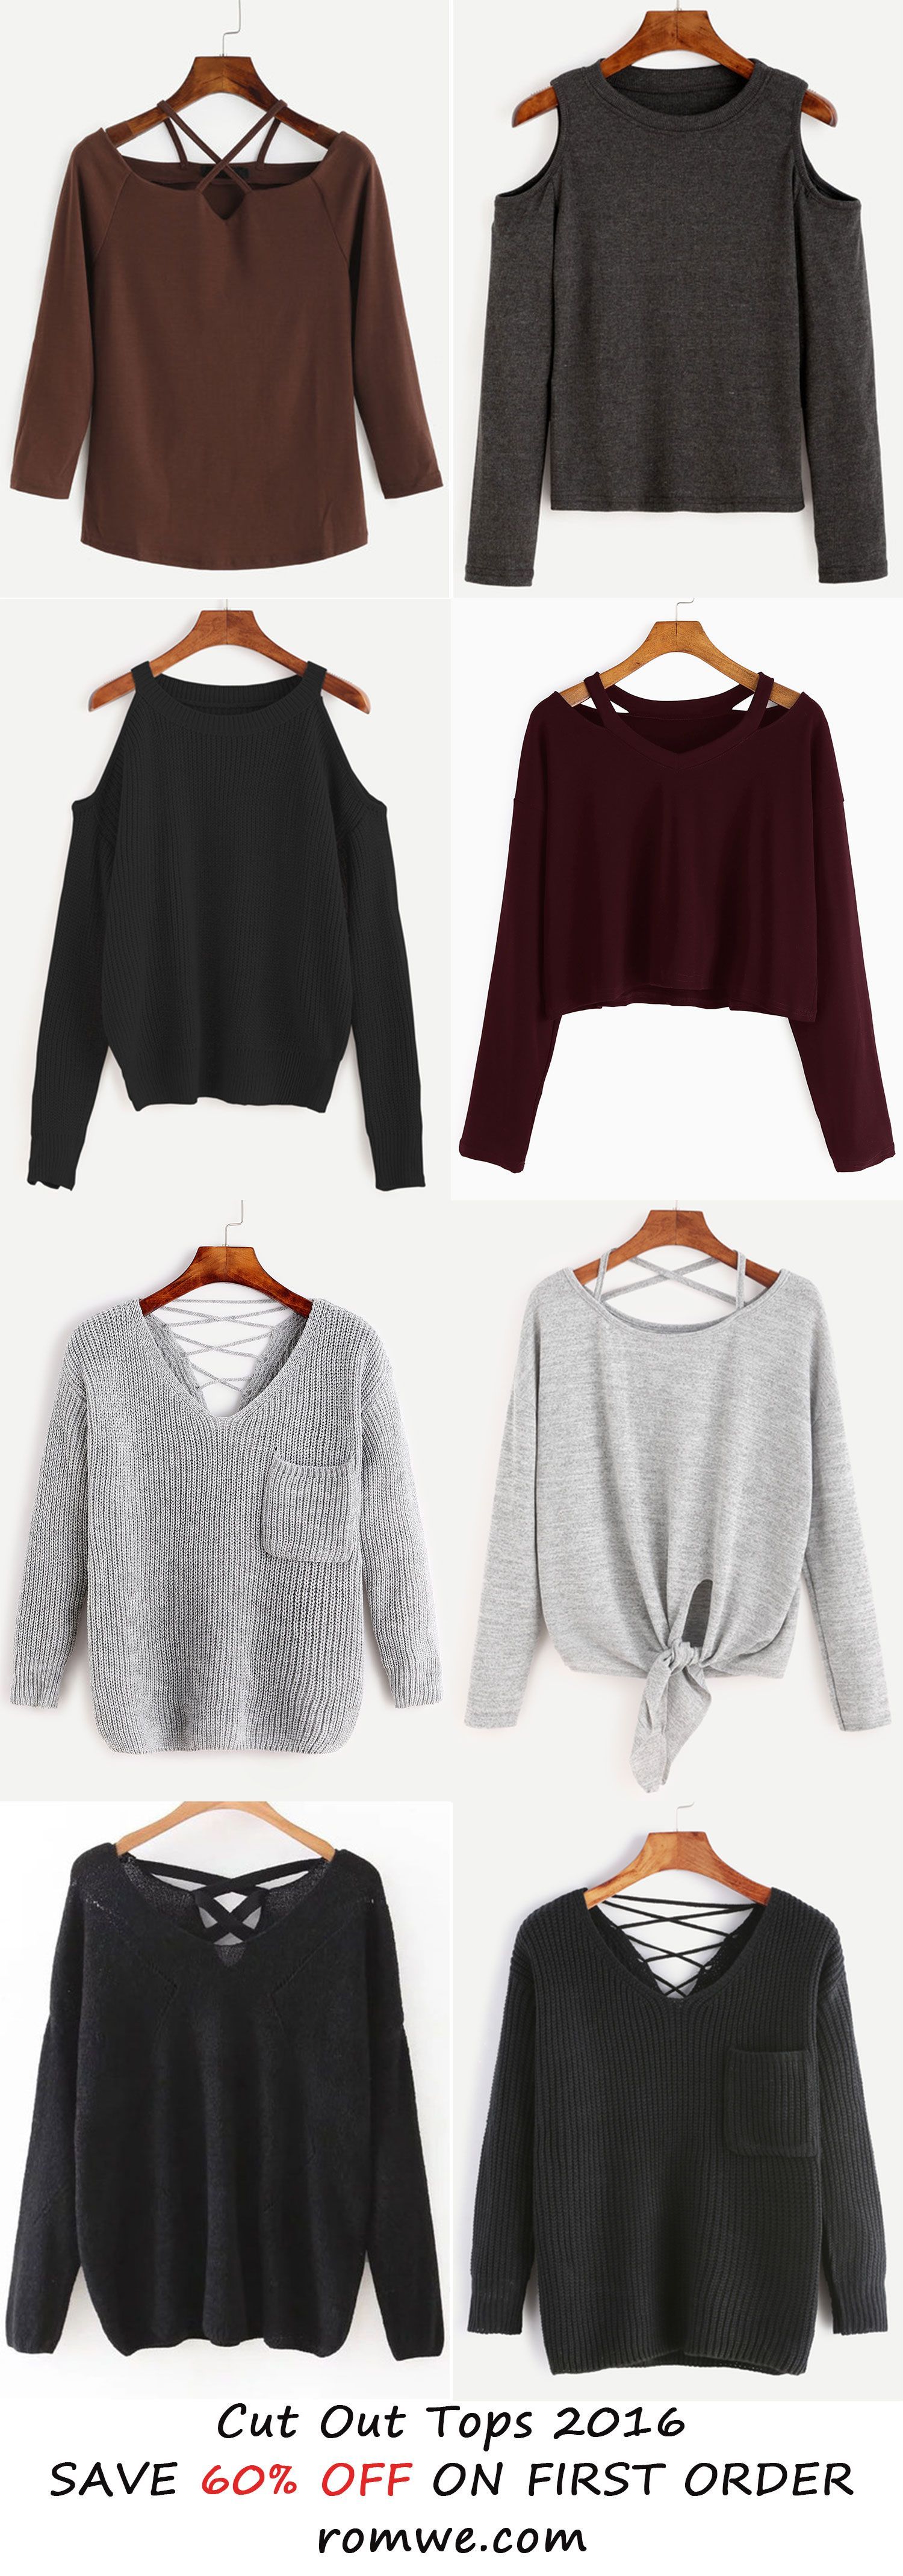 Sexy Fall & Winter – Cut Out Tops from romwe.com